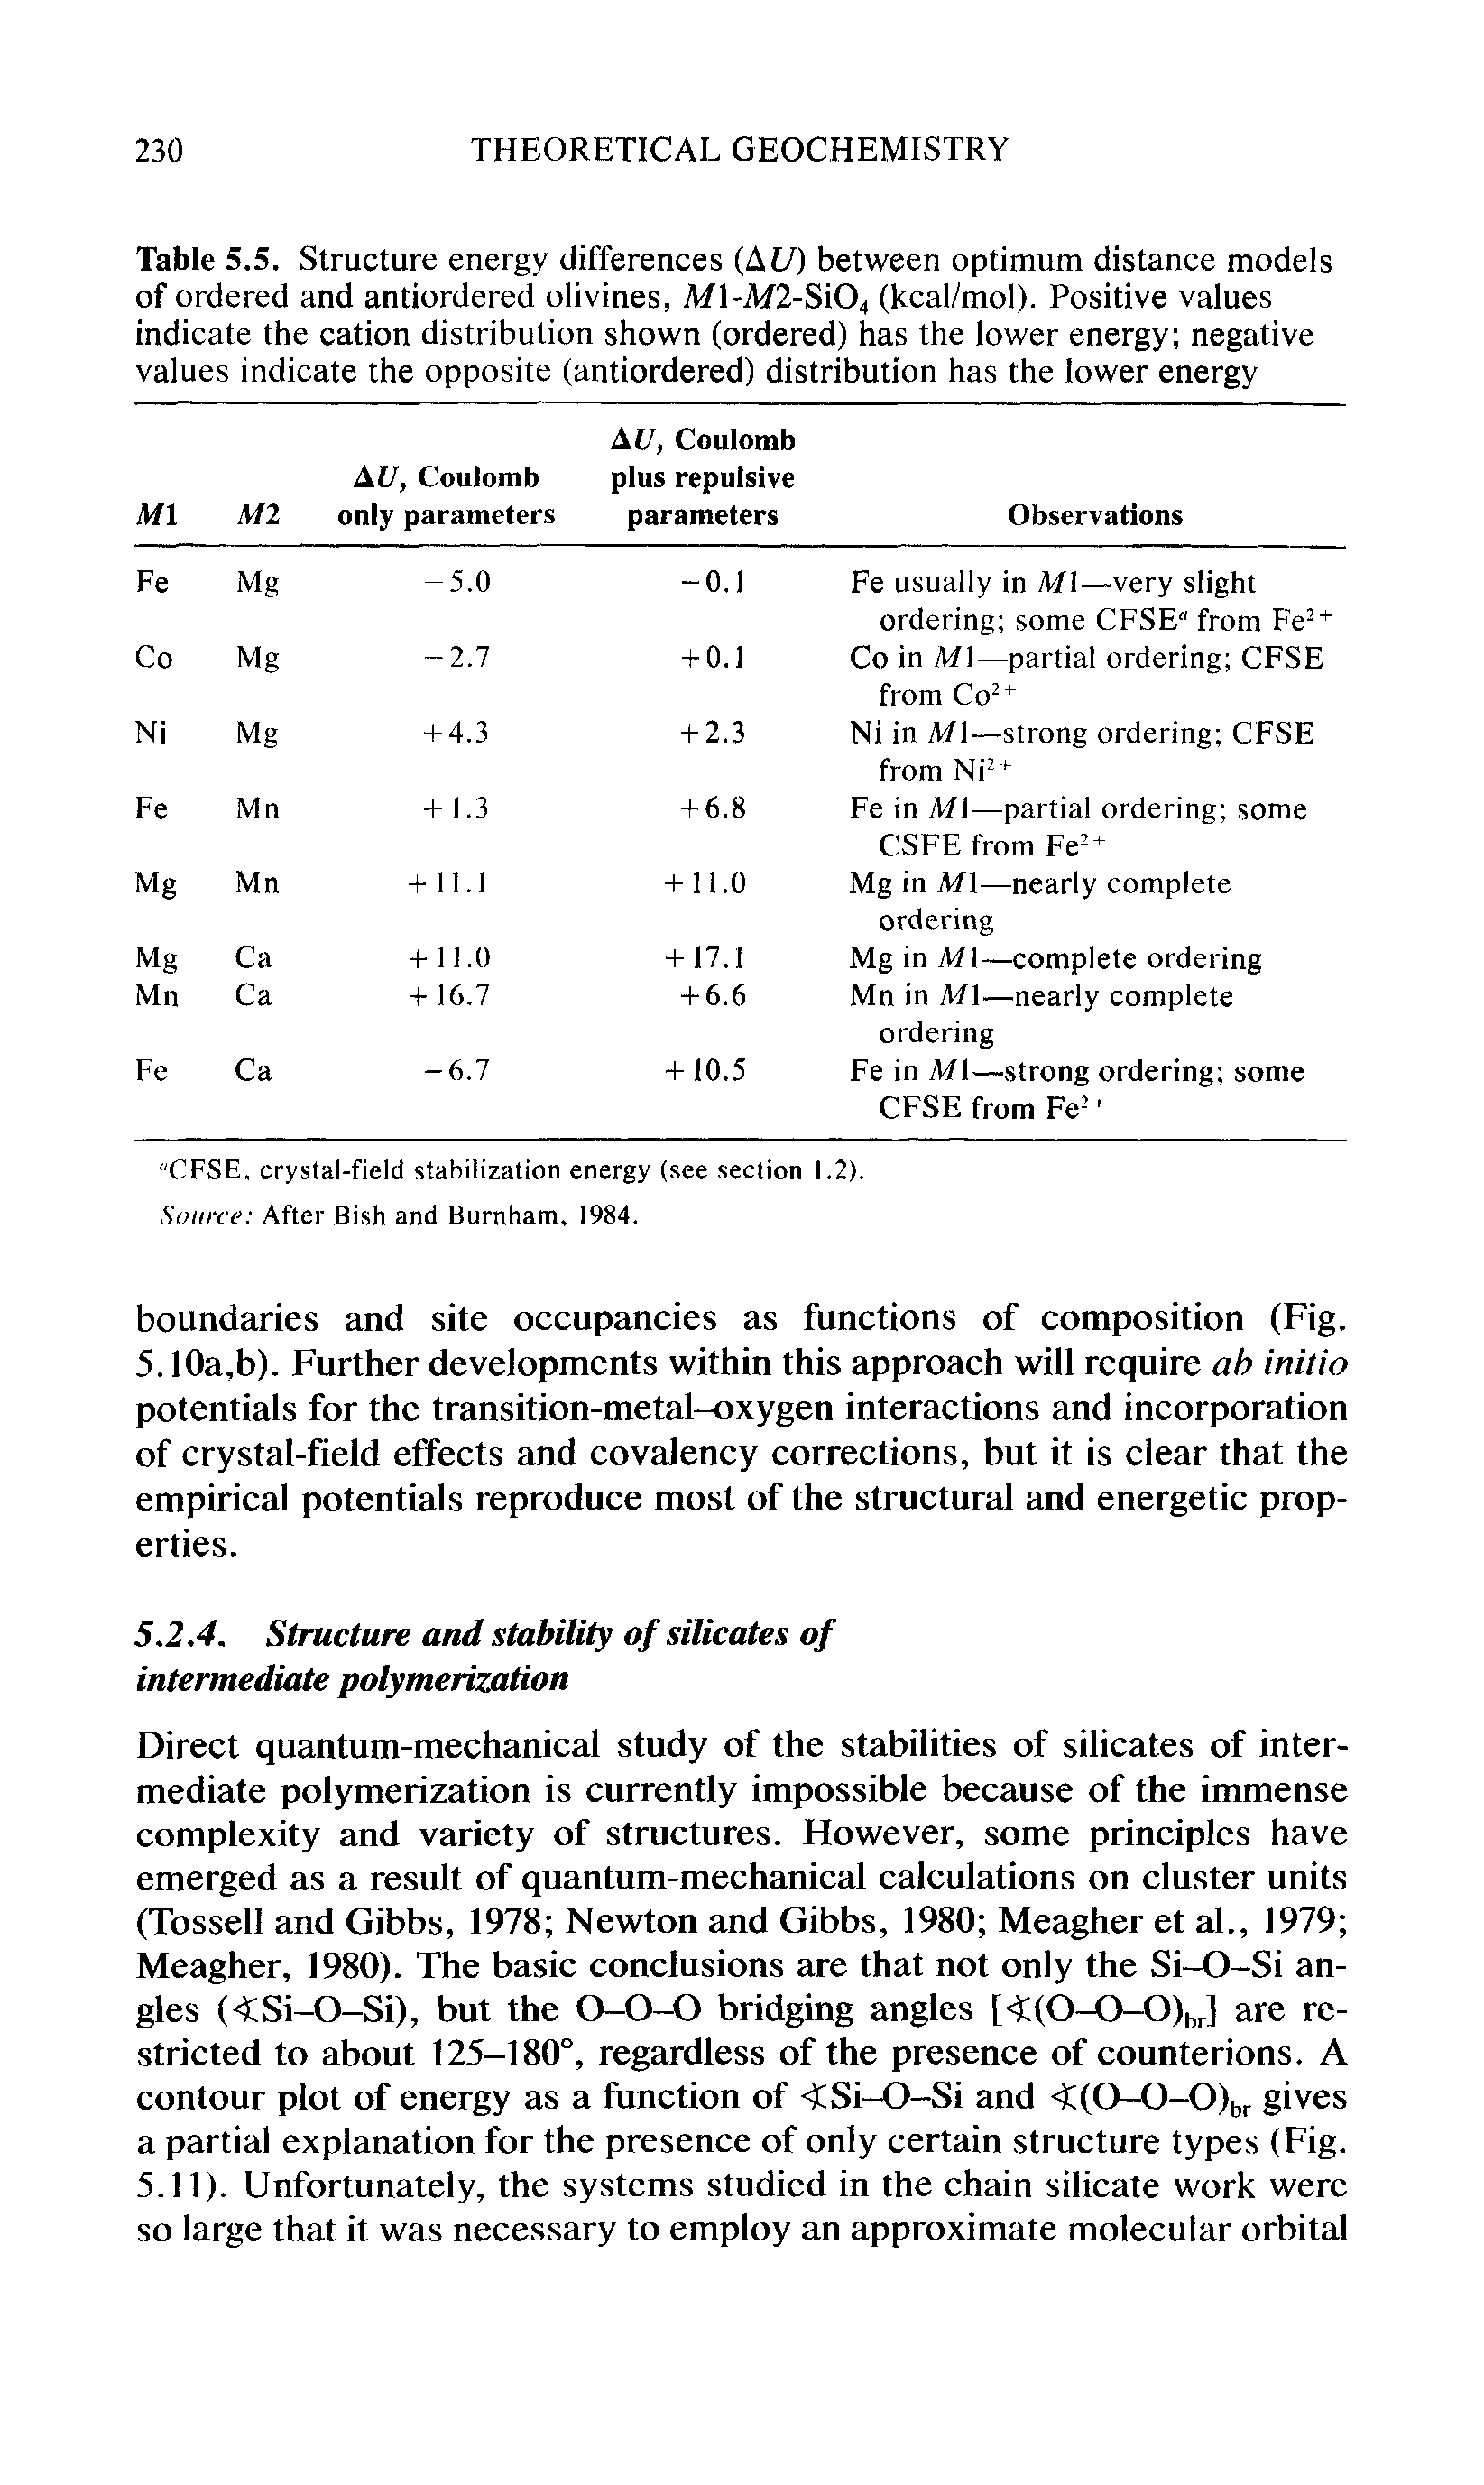 Table 5.5. Structure energy differences (At/) between optimum distance models of ordered and antiordered olivines, Ml-M2-Si04 (kcal/mol). Positive values indicate the cation distribution shown (ordered) has the lower energy negative values indicate the opposite (antiordered) distribution has the lower energy...